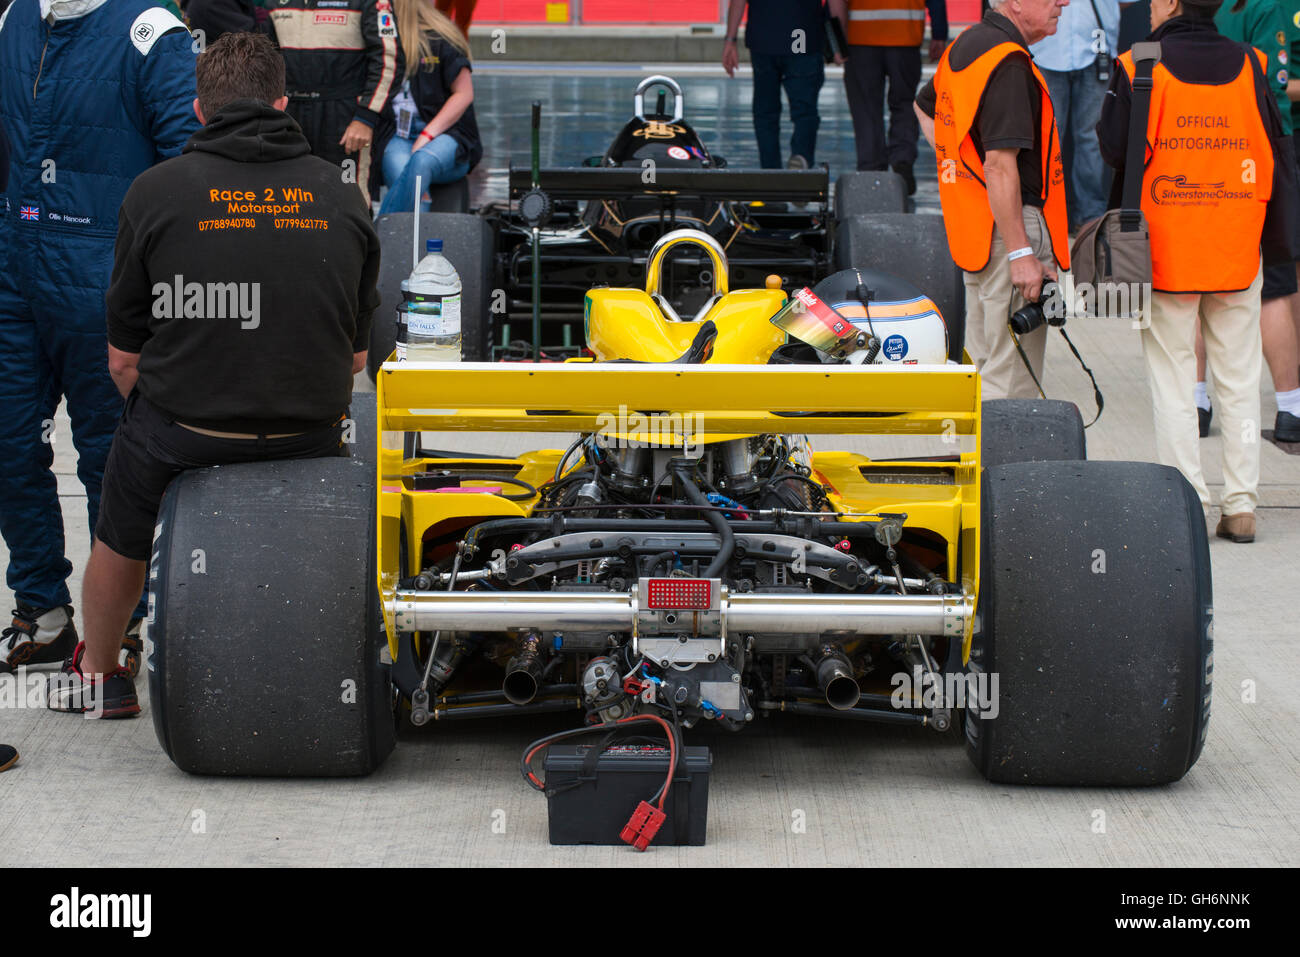 Ollie Hancock's Fittipaldi F5A F1 racing car at the FIA Masters Historic Formula 1 race, 2016 Silverstone Classic event, UK Stock Photo